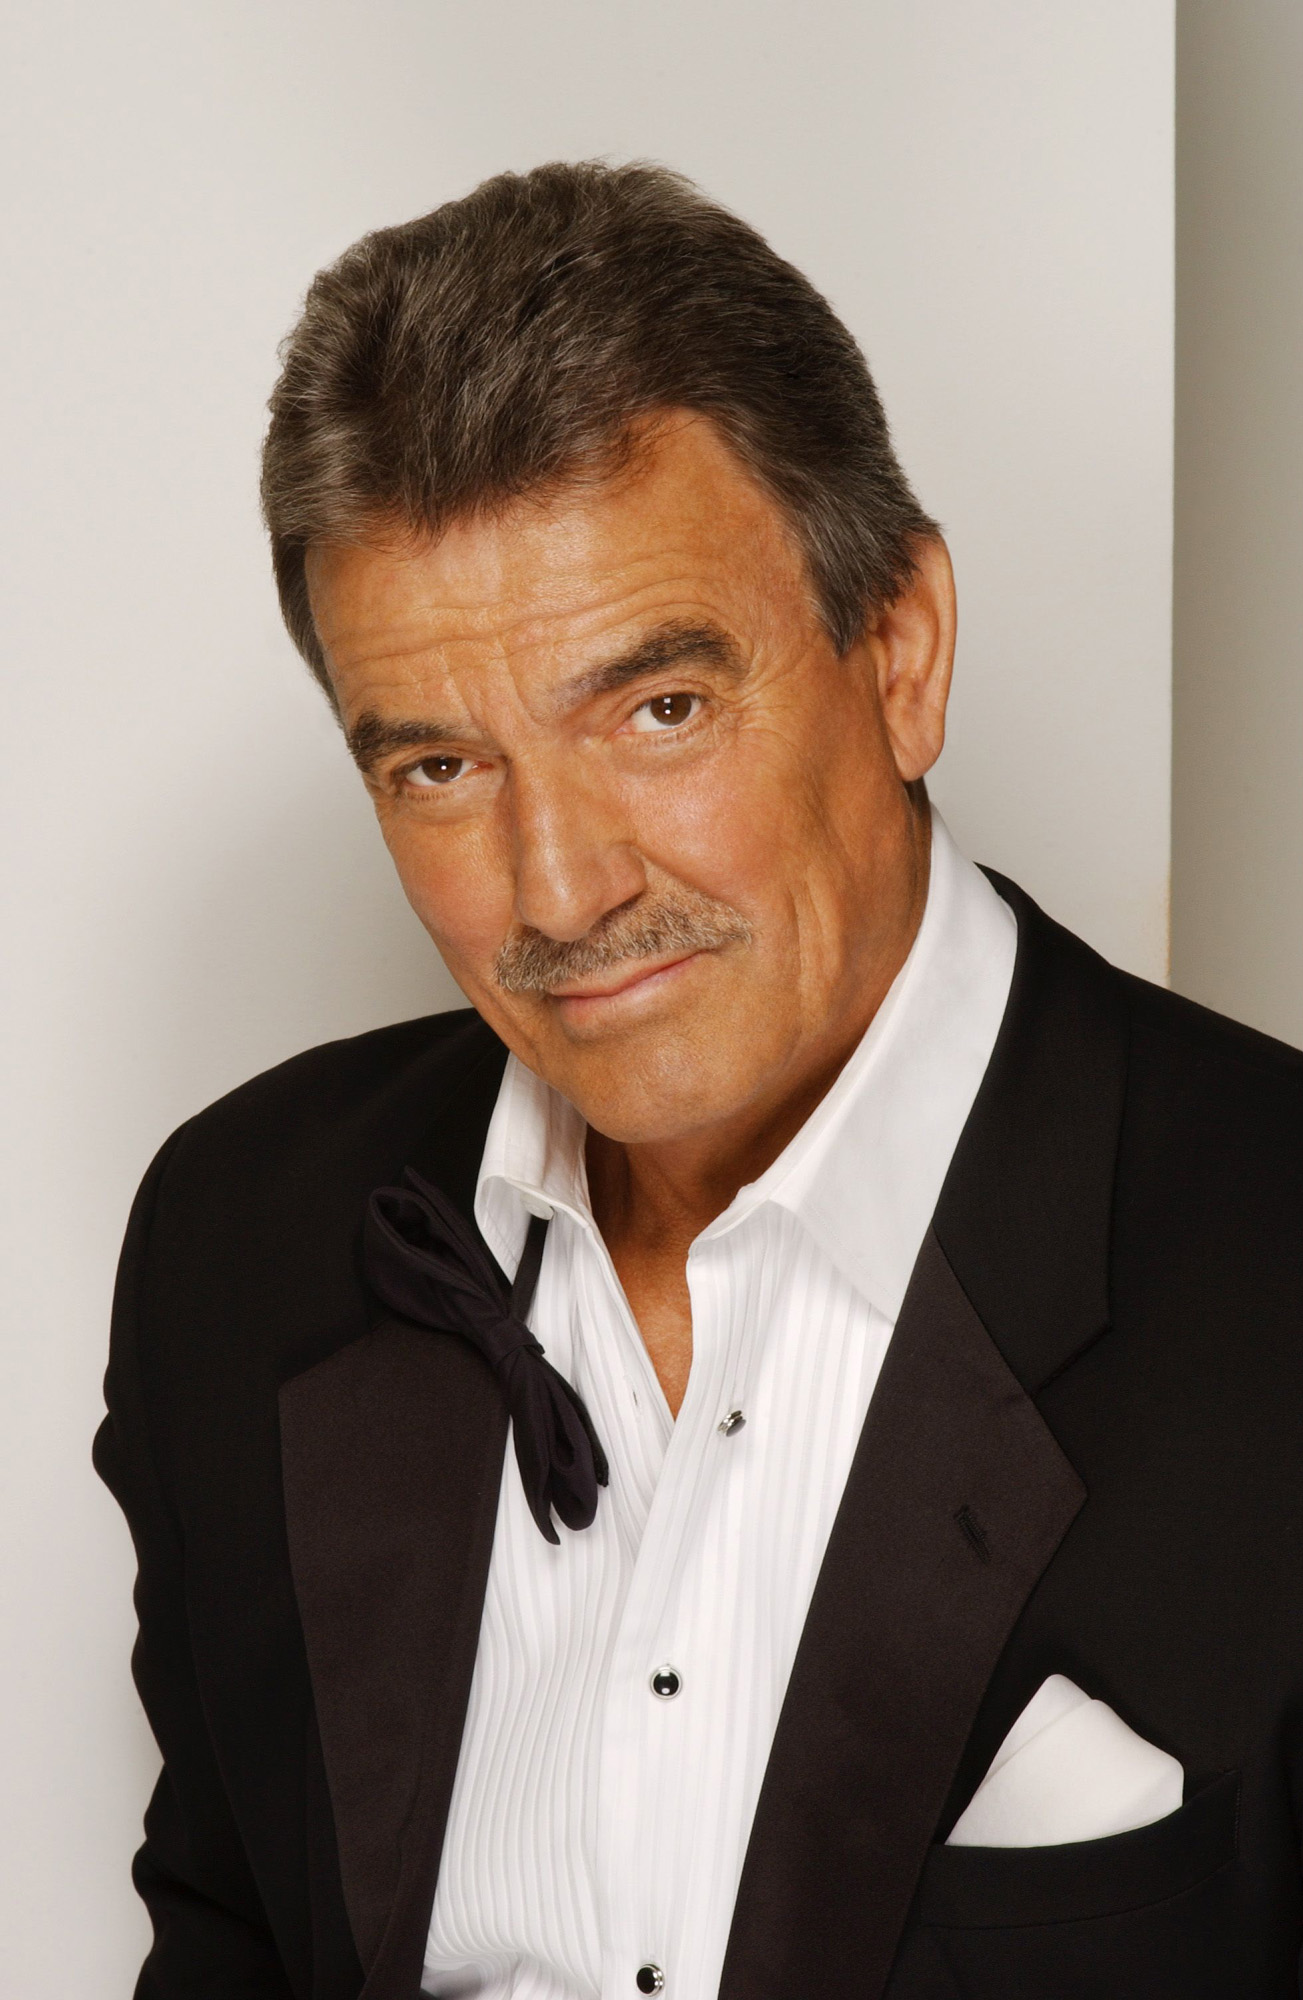 Eric Braeden stars as "Victor Newman" in the CBS daytime drama "The Young And The Restless" on the CBS Television Network. | Source: Getty Images